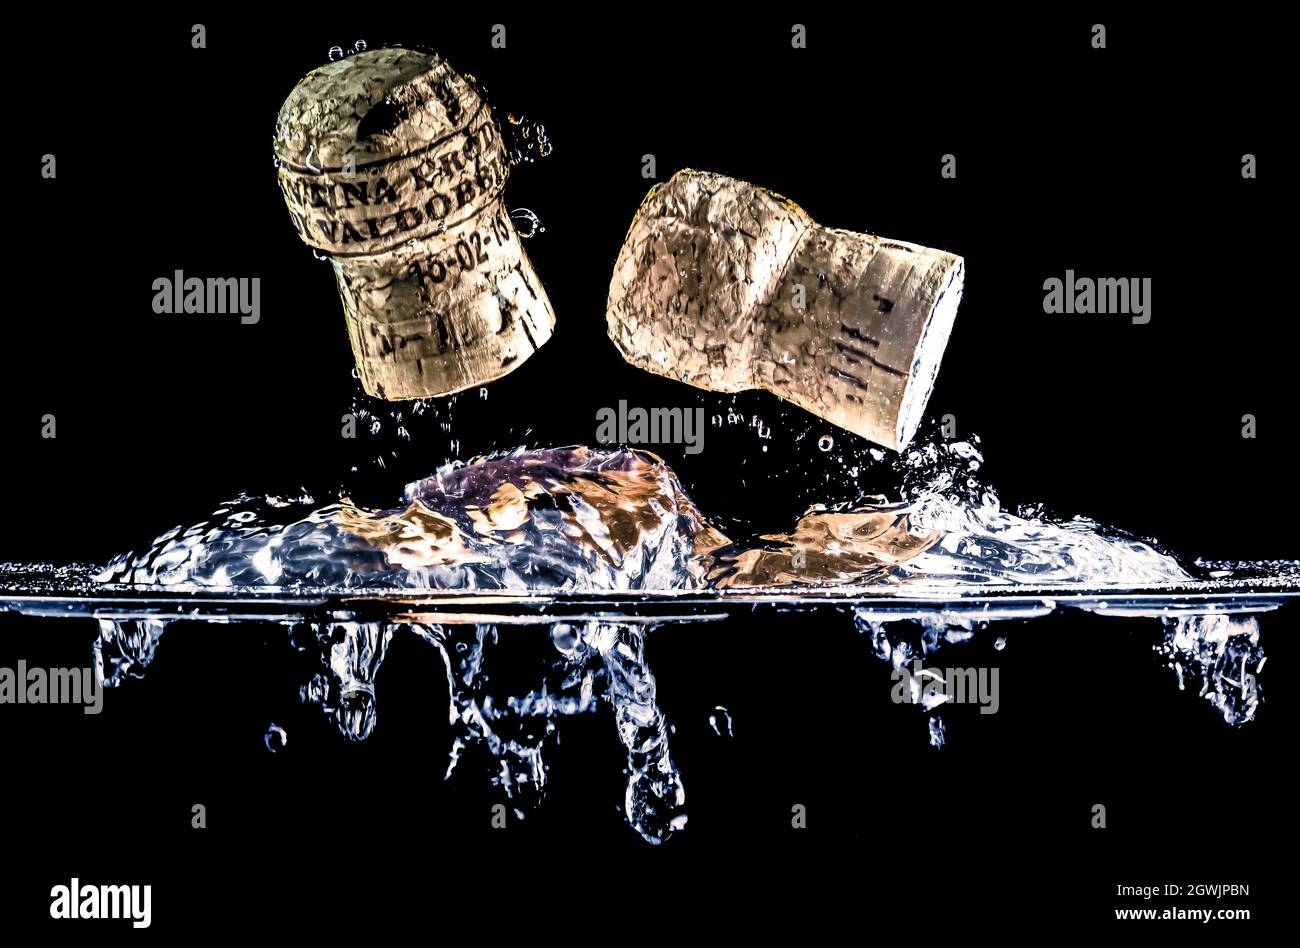 Two cork plugs flying through the water surface, splashing water on a black background. Prosecco wine plugs from the Valdobbiadene region, Italy. Stock Photo